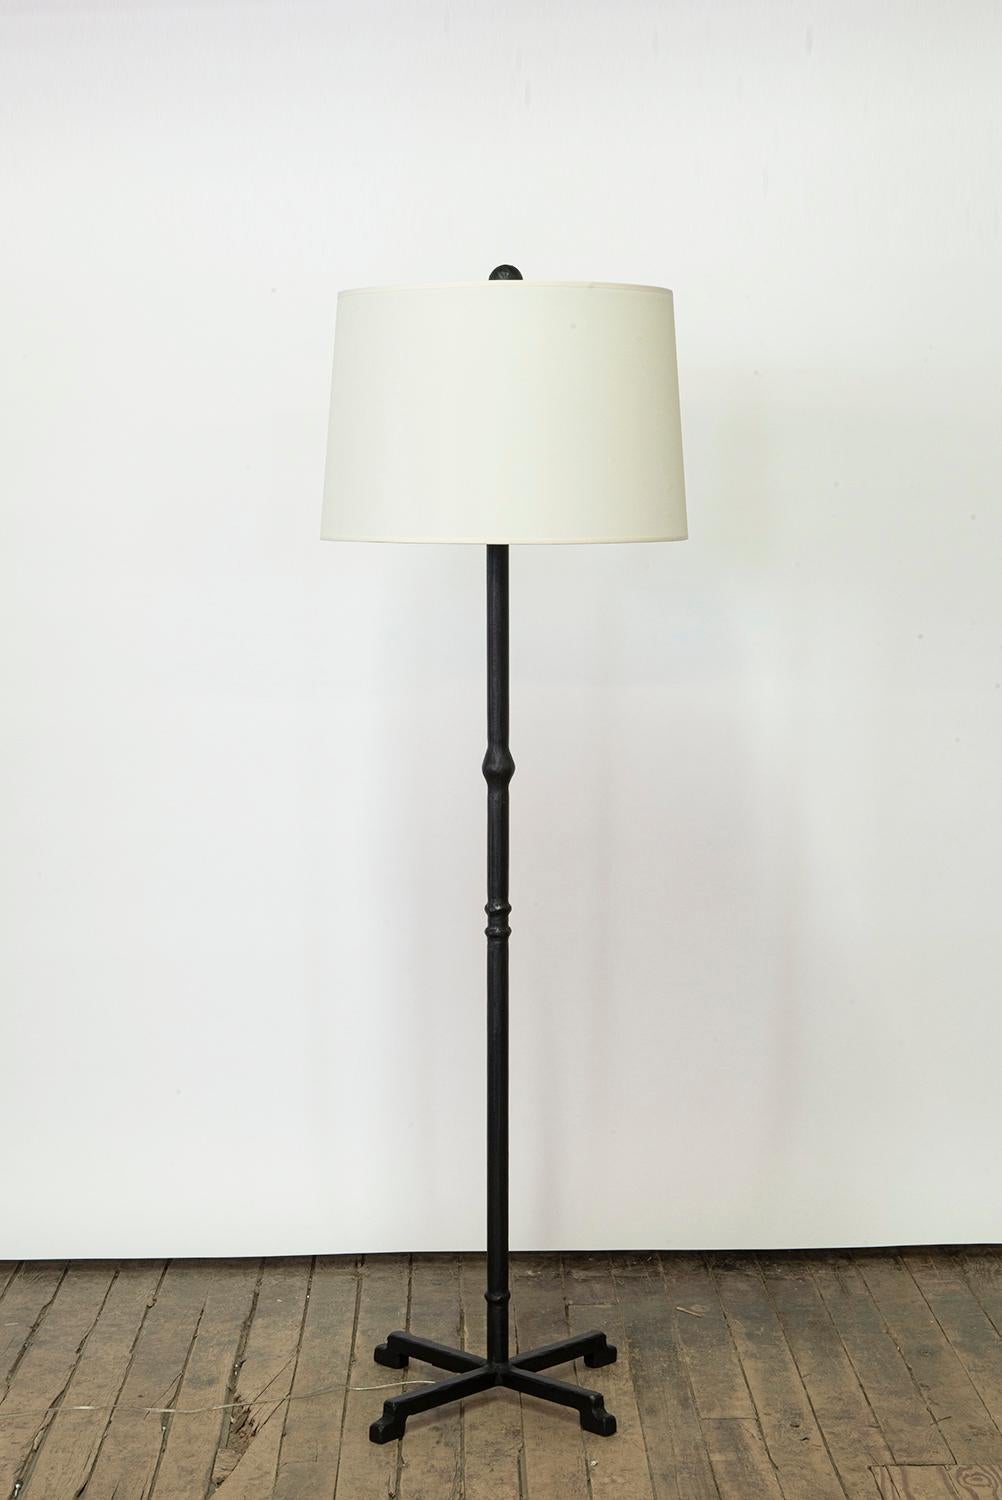 Lamp No. 5 
J.M. Szymanski
D. 2022

This special floor lamp features a linen shade and a carved steel base. A single A unique take on a classic look, this simple lamp features a custom linen shade and elegant steel embellishments. While details